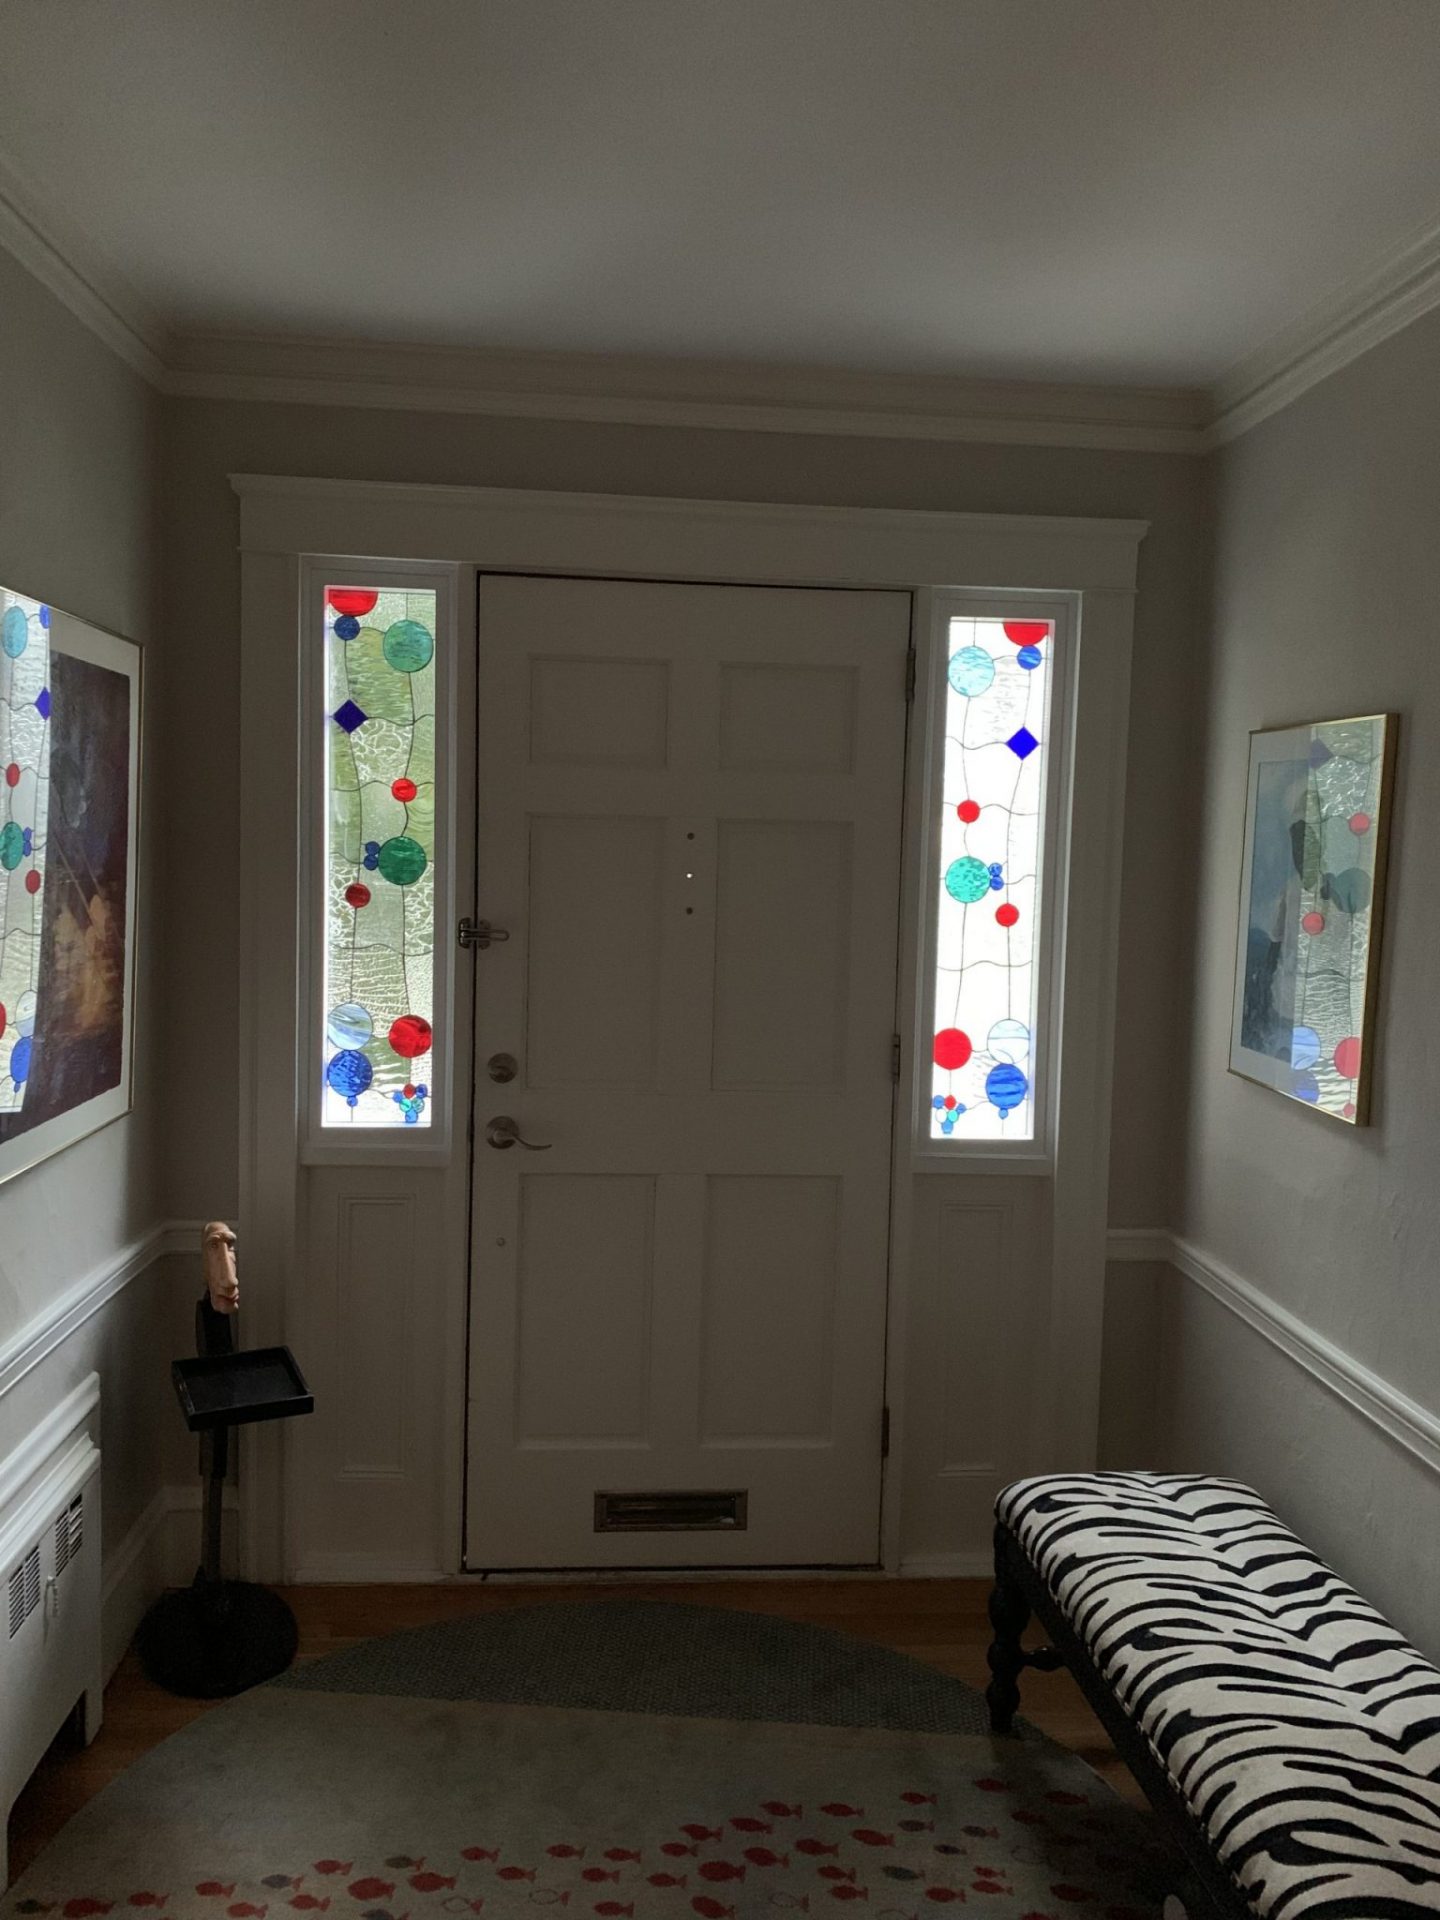 Abstract Bubbles Stained Glass Sidelites for Privacy & Natural Light from exterior